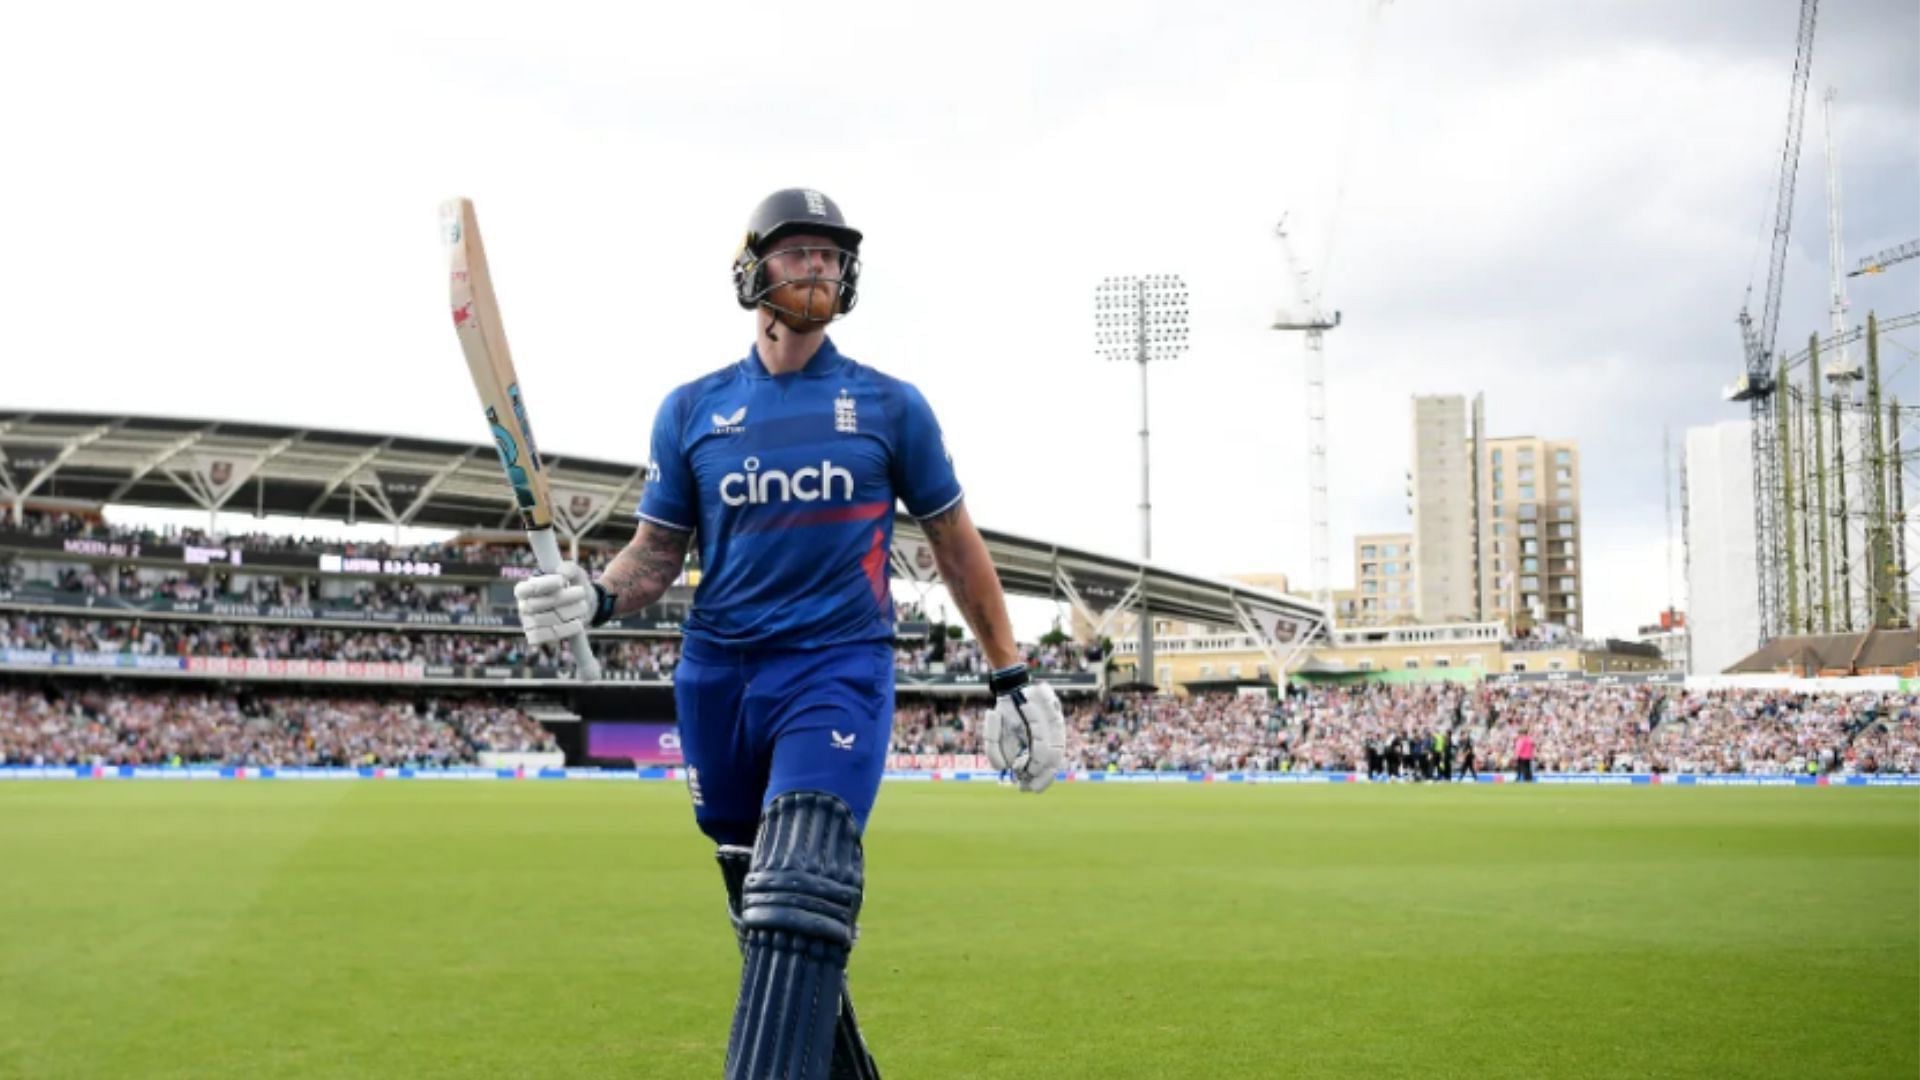 5 England cricketers who might be playing their last World Cup in 2023 ft. Ben Stokes